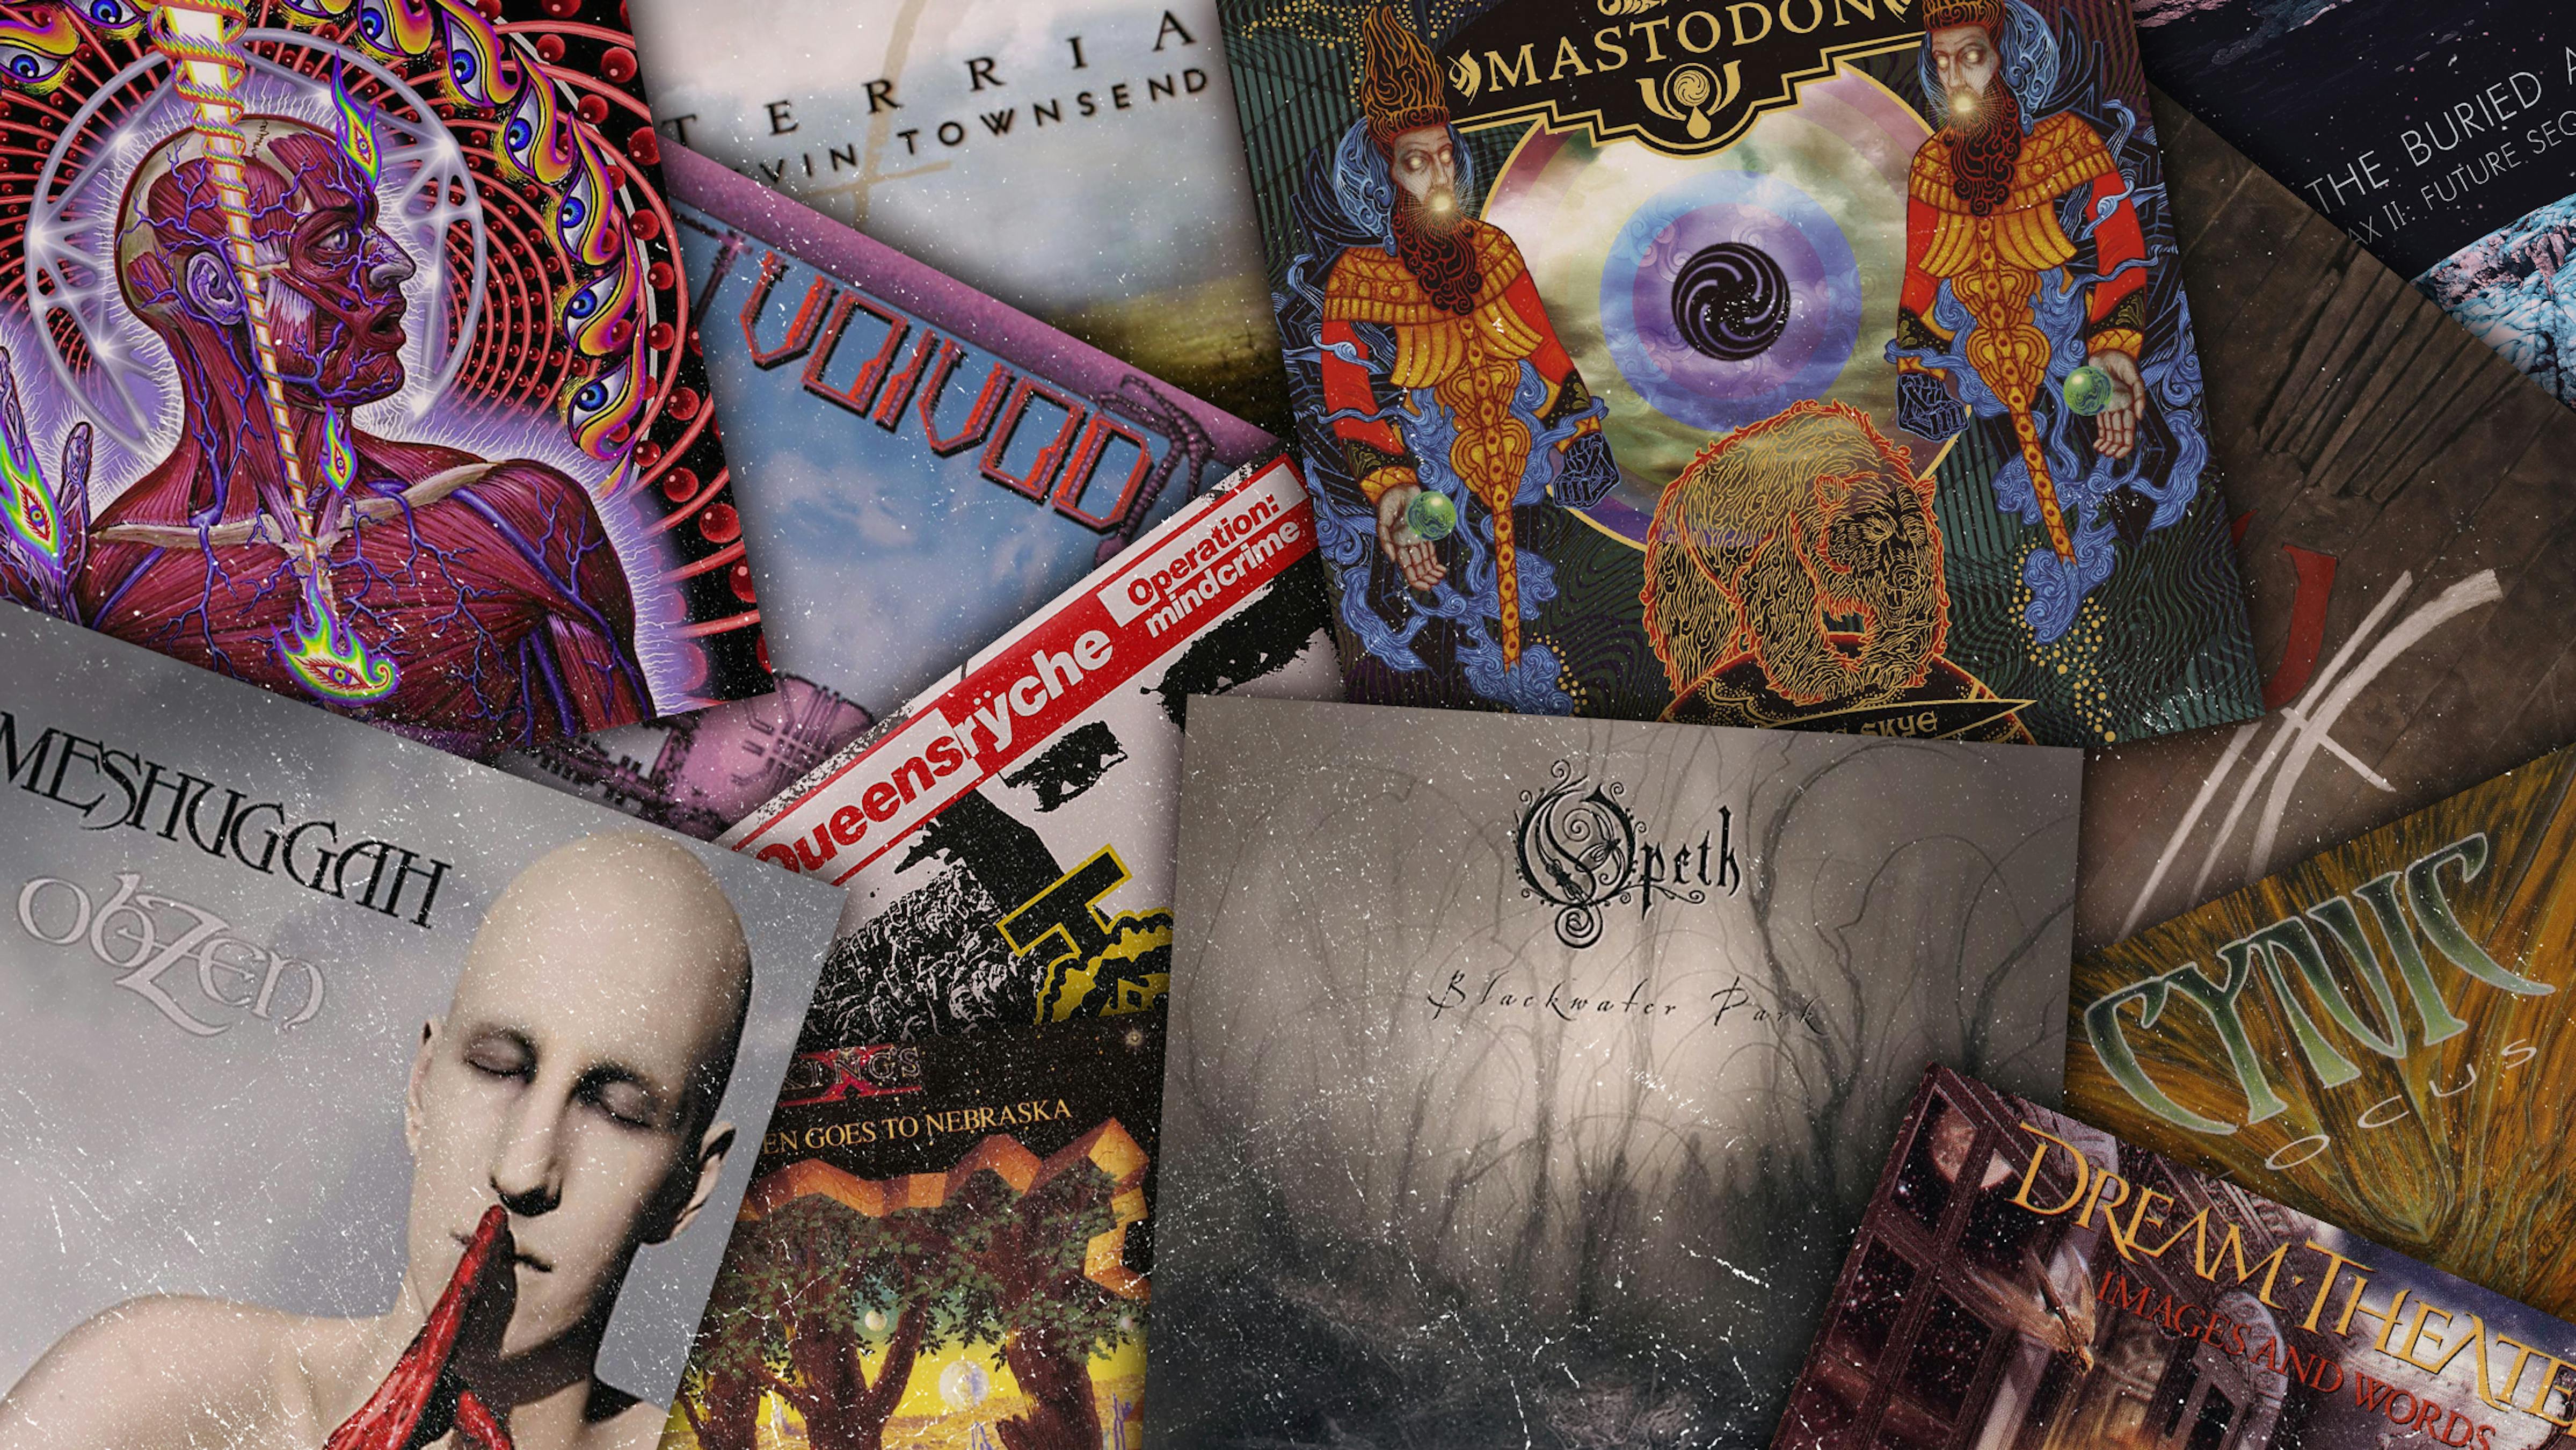 The 13 essential progressive metal albums you need to know — Kerrang!